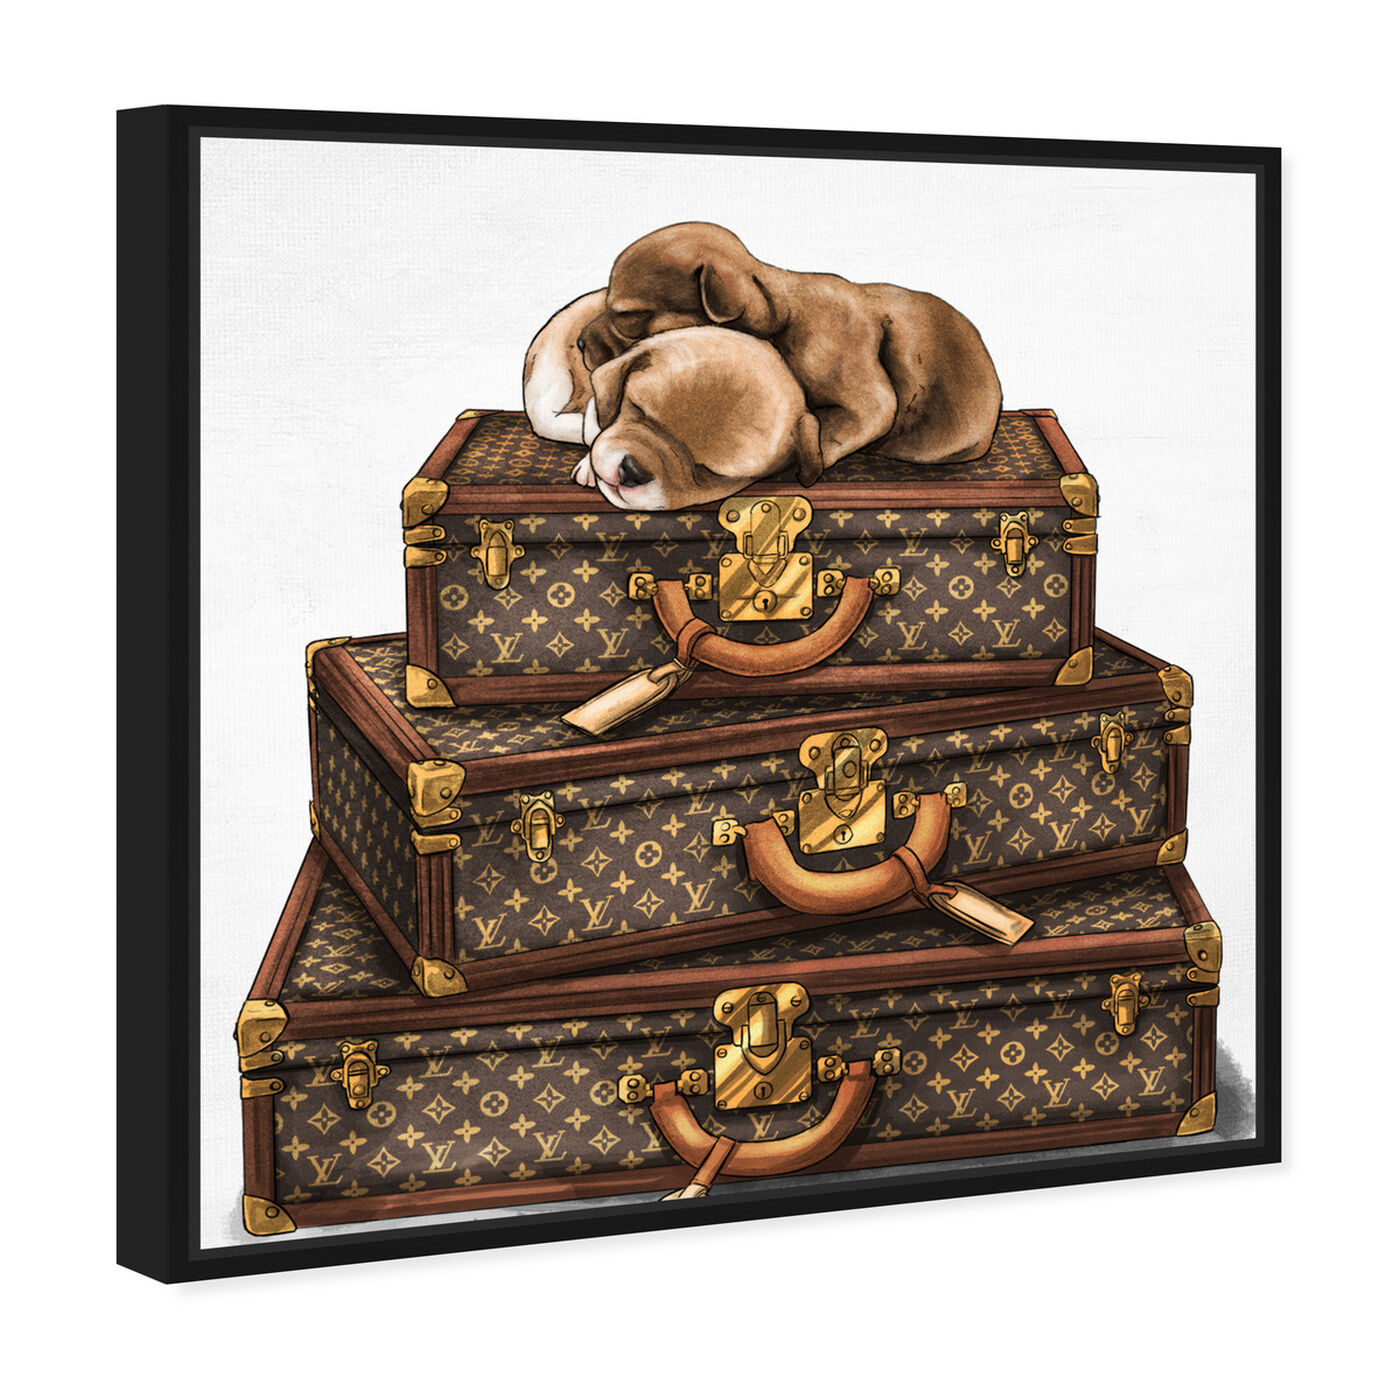 Sleeping Pair Suitcase | Fashion and Glam Wall Art by Oliver Gal